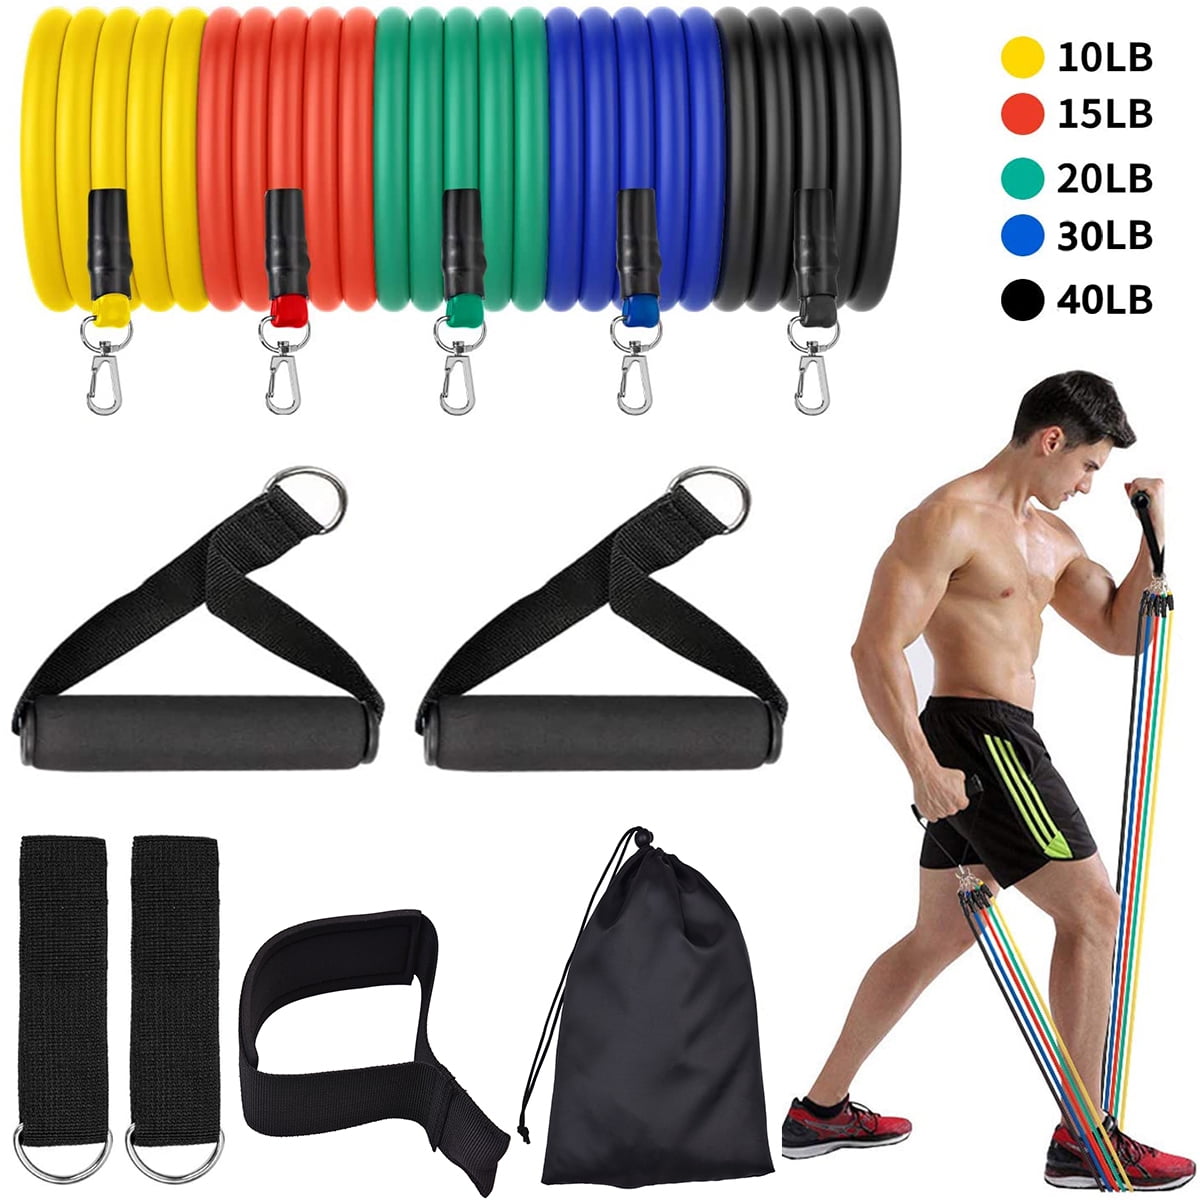 Yoga 16 pcs Physical Therapy Waterproof Carry Bag Resistance Bands Set Exercise Bands with Door Anchor Legs Ankle Straps for Resistance Training Home Workouts Handles 